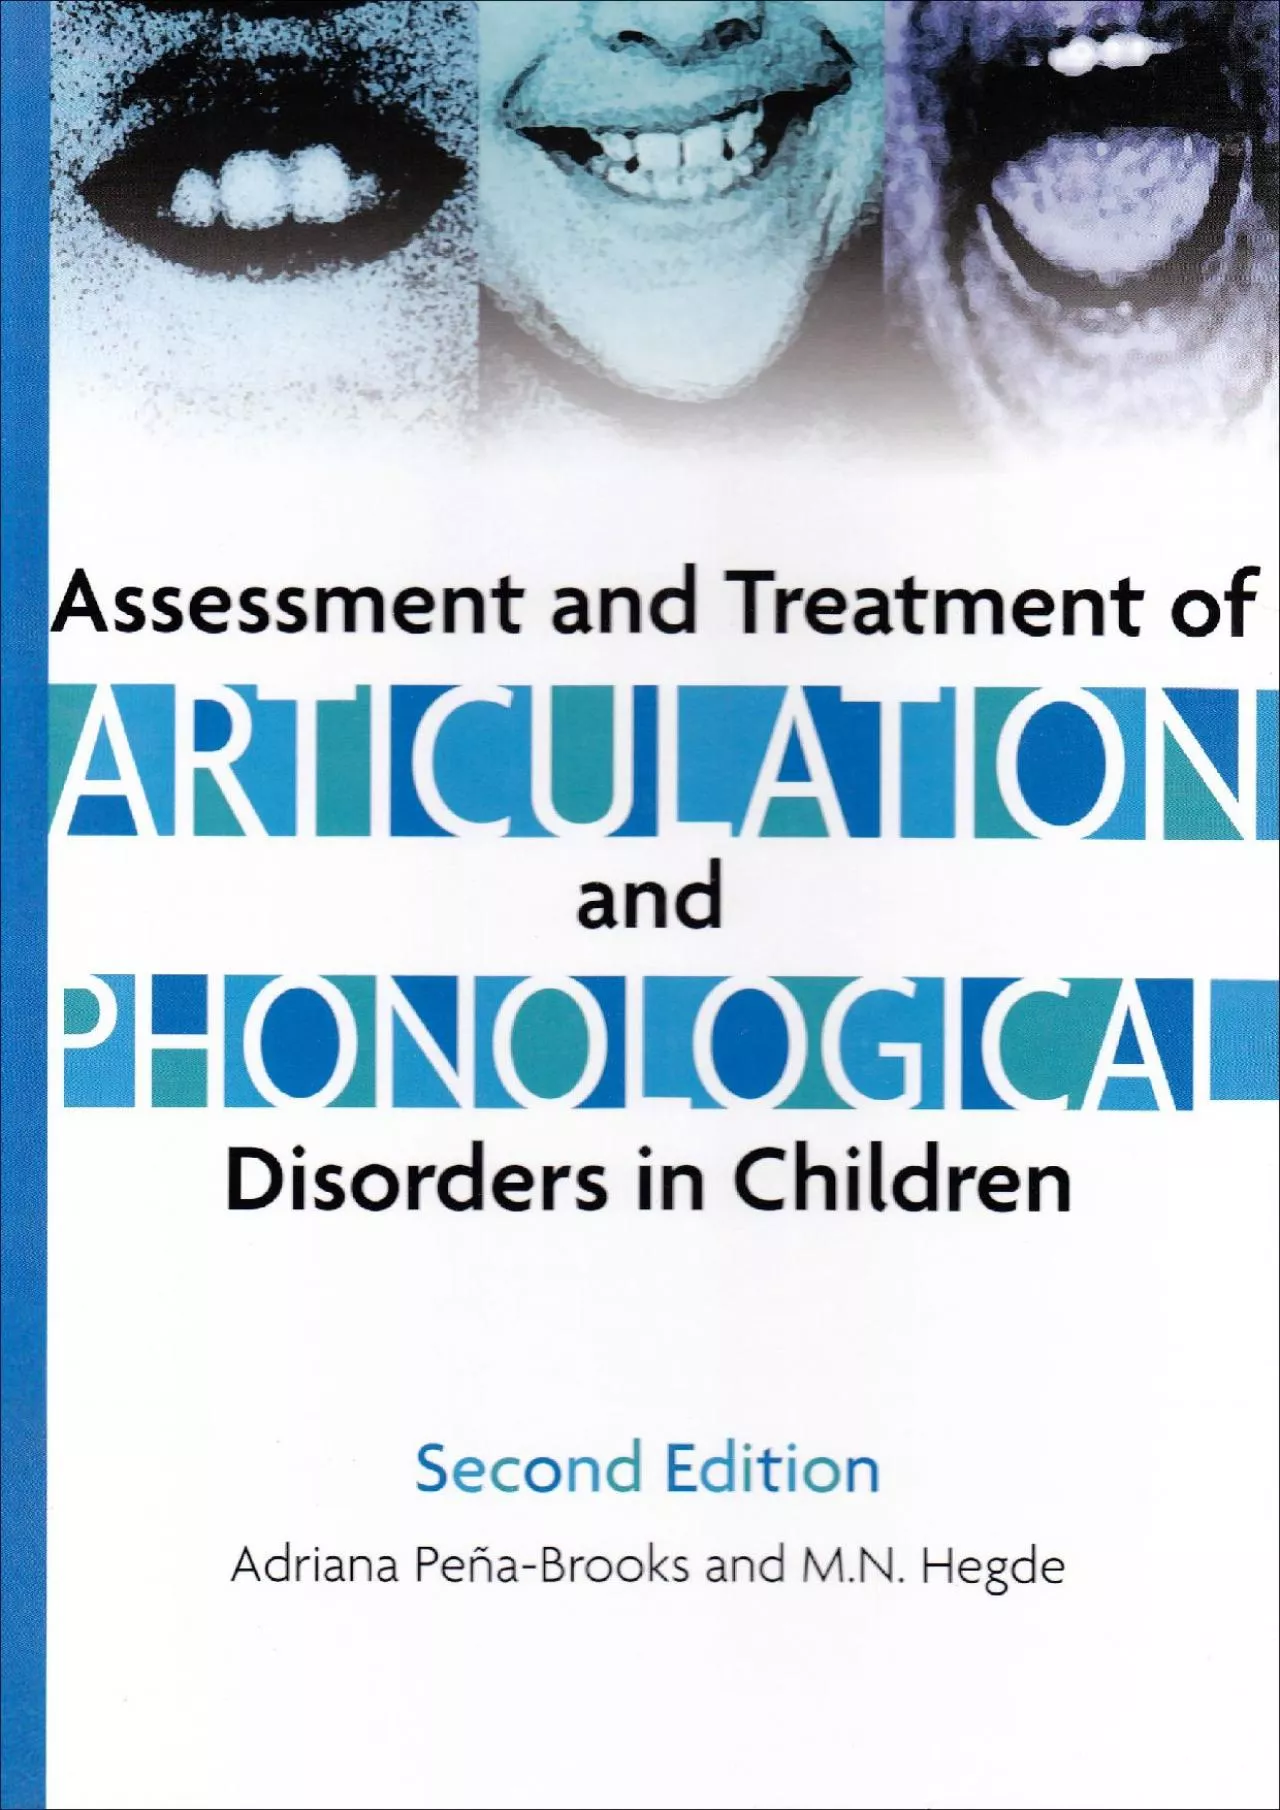 (EBOOK)-Assessment And Treatment of Articulation And Phonological Disorders in Children: